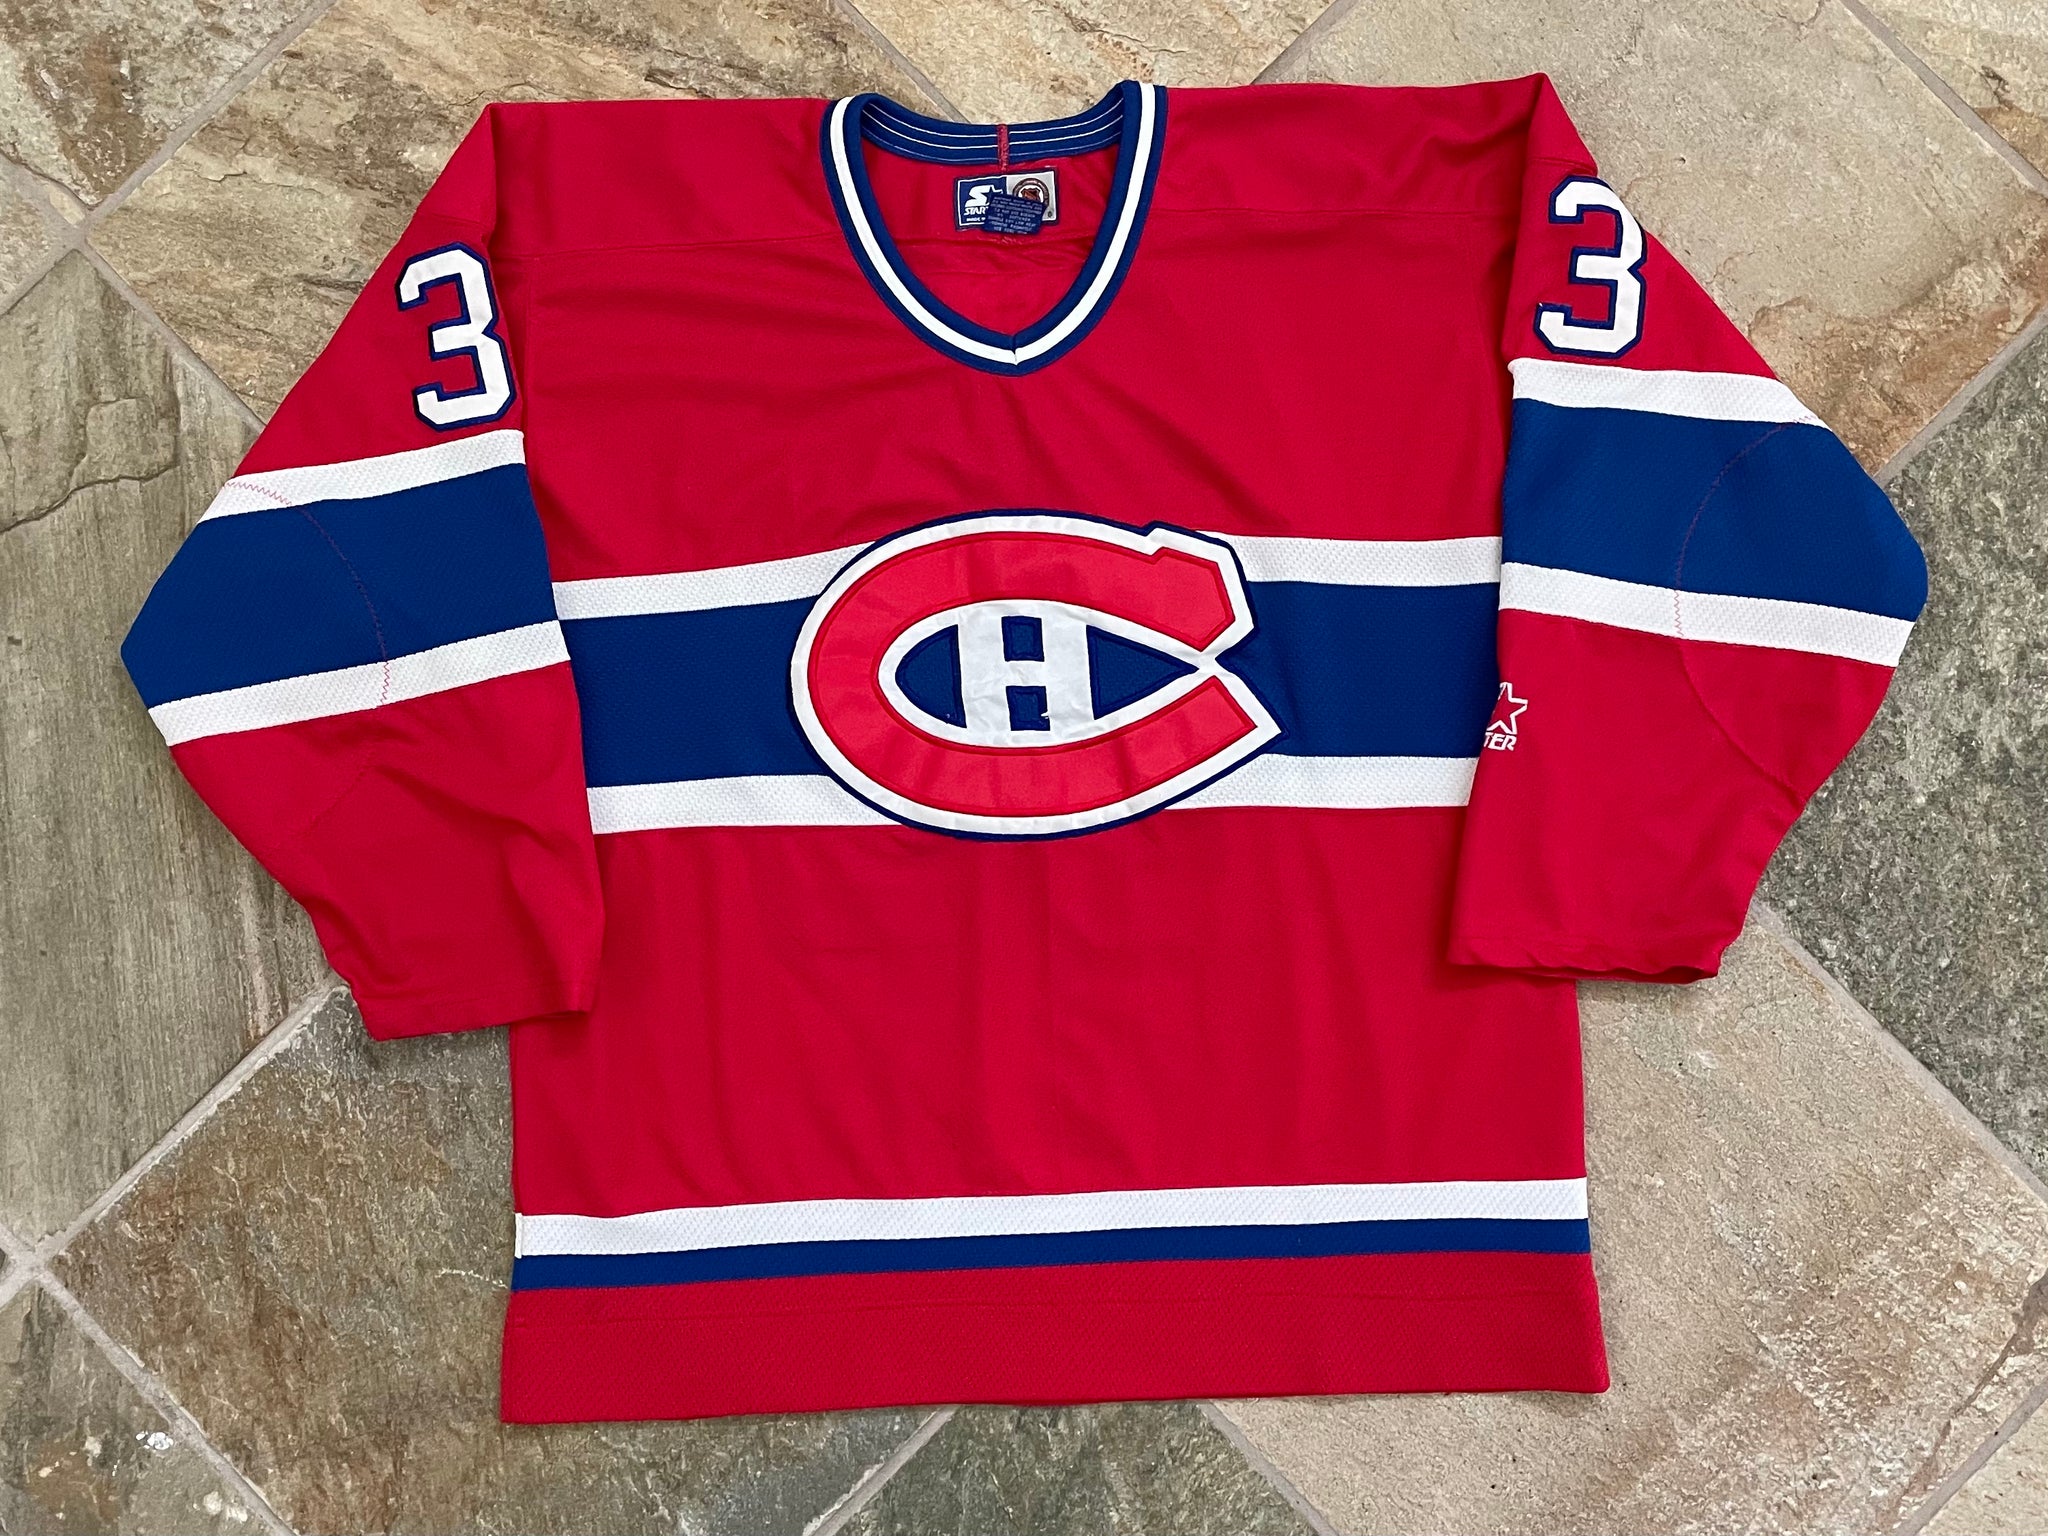 Vintage 90s NHL Montreal Canadiens Baseball Jersey